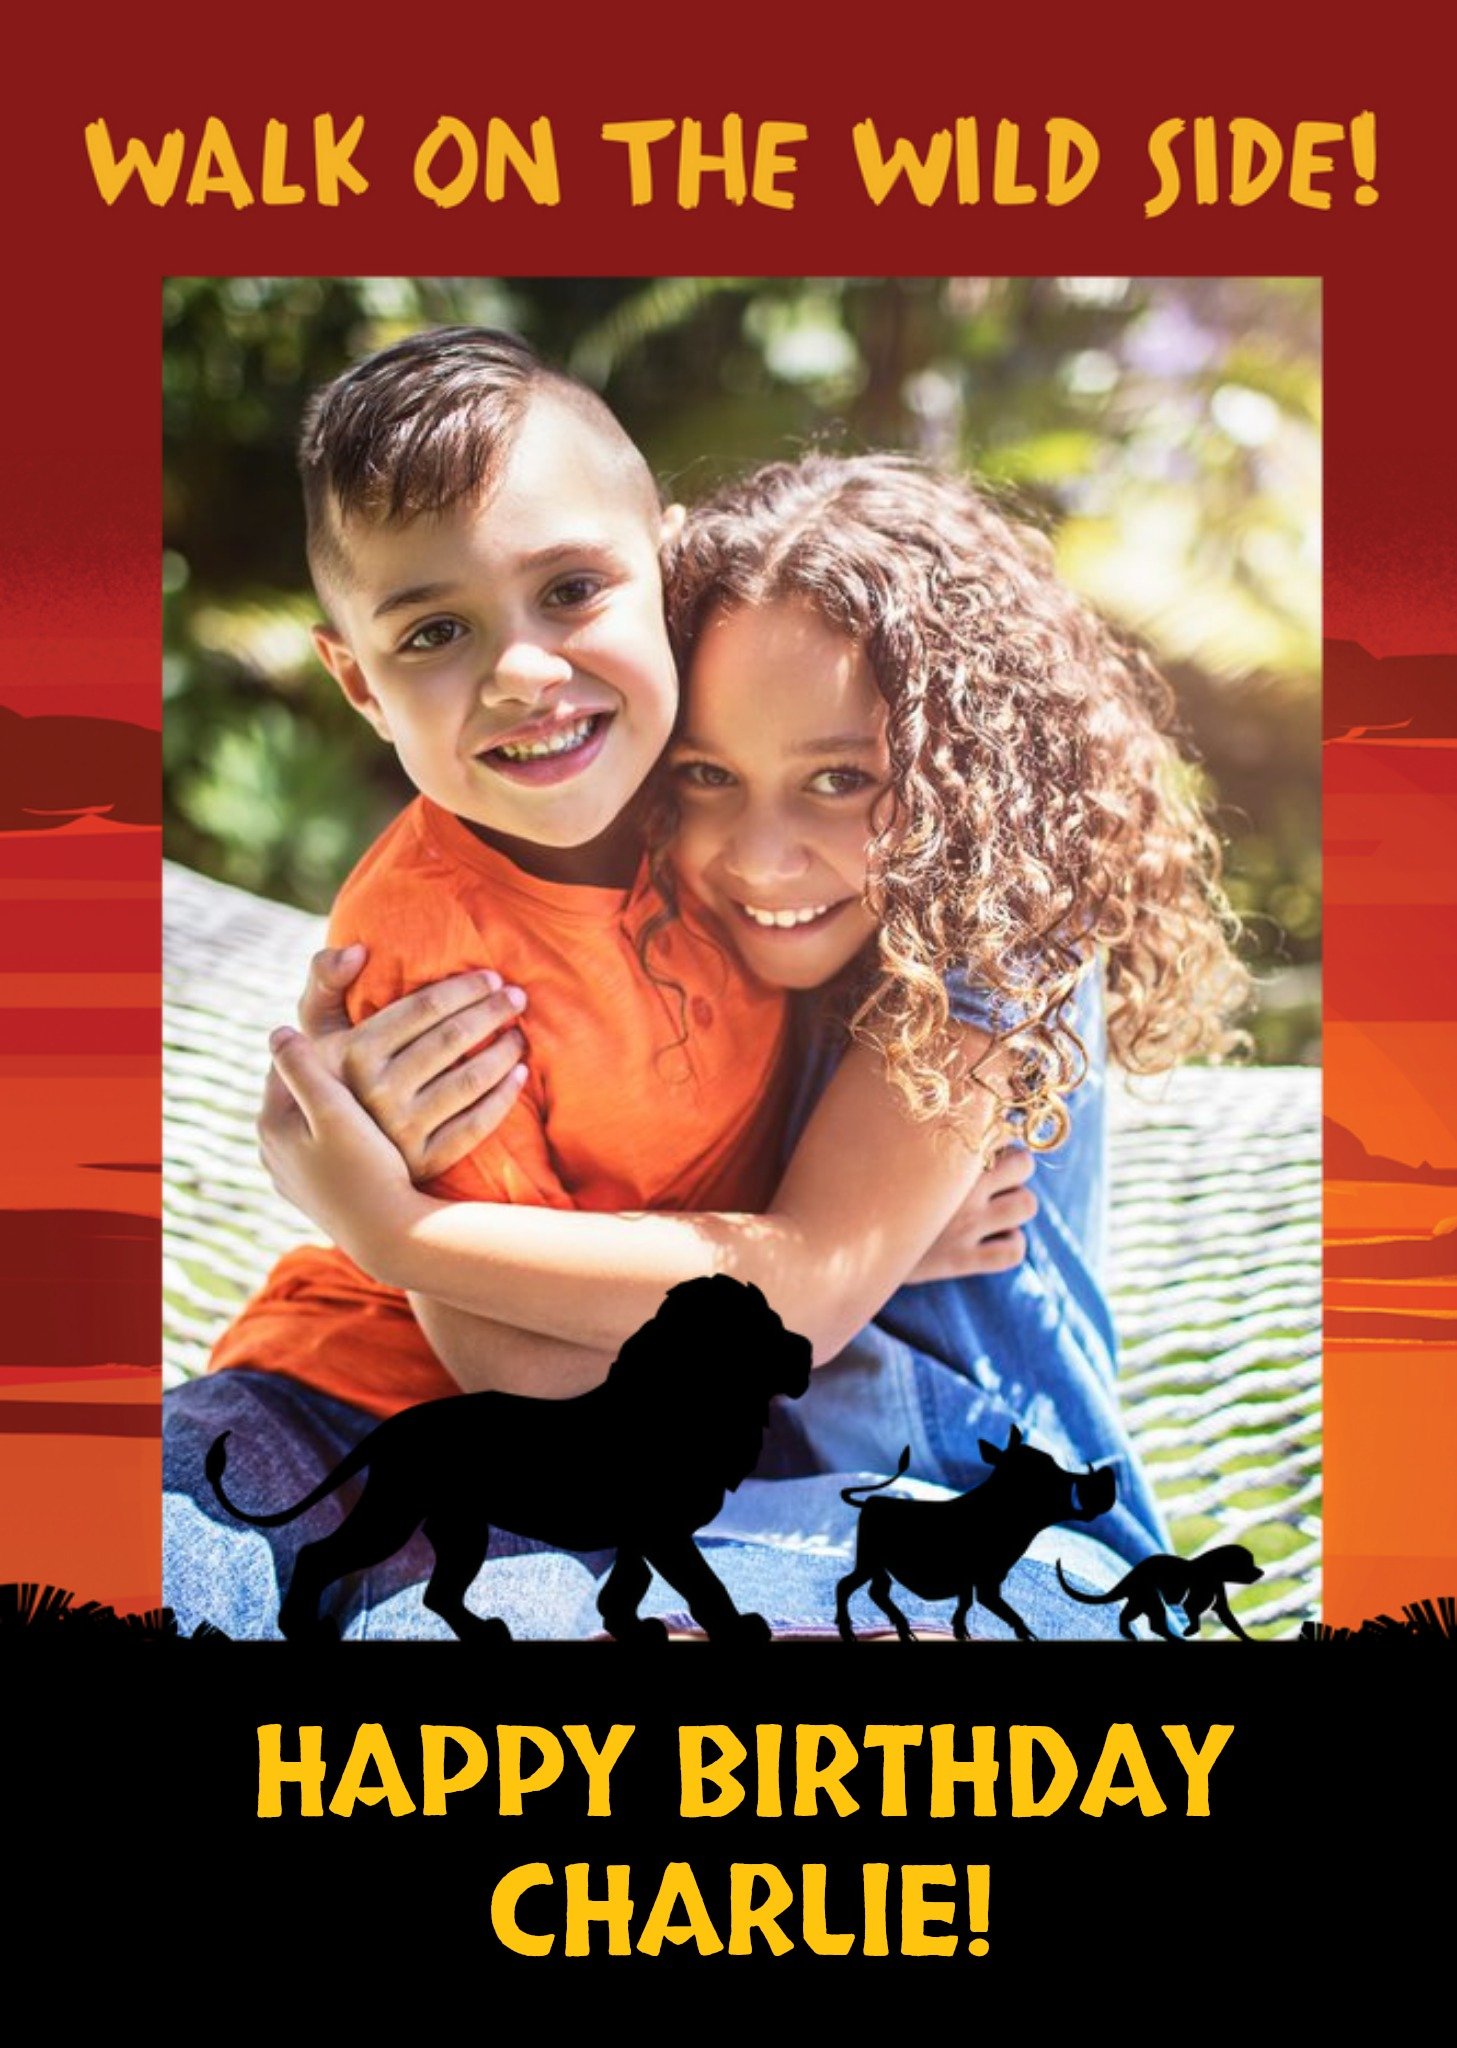 Walk On The Wild Side The Lion King Film Kids Birthday Photo Upload Card, Large